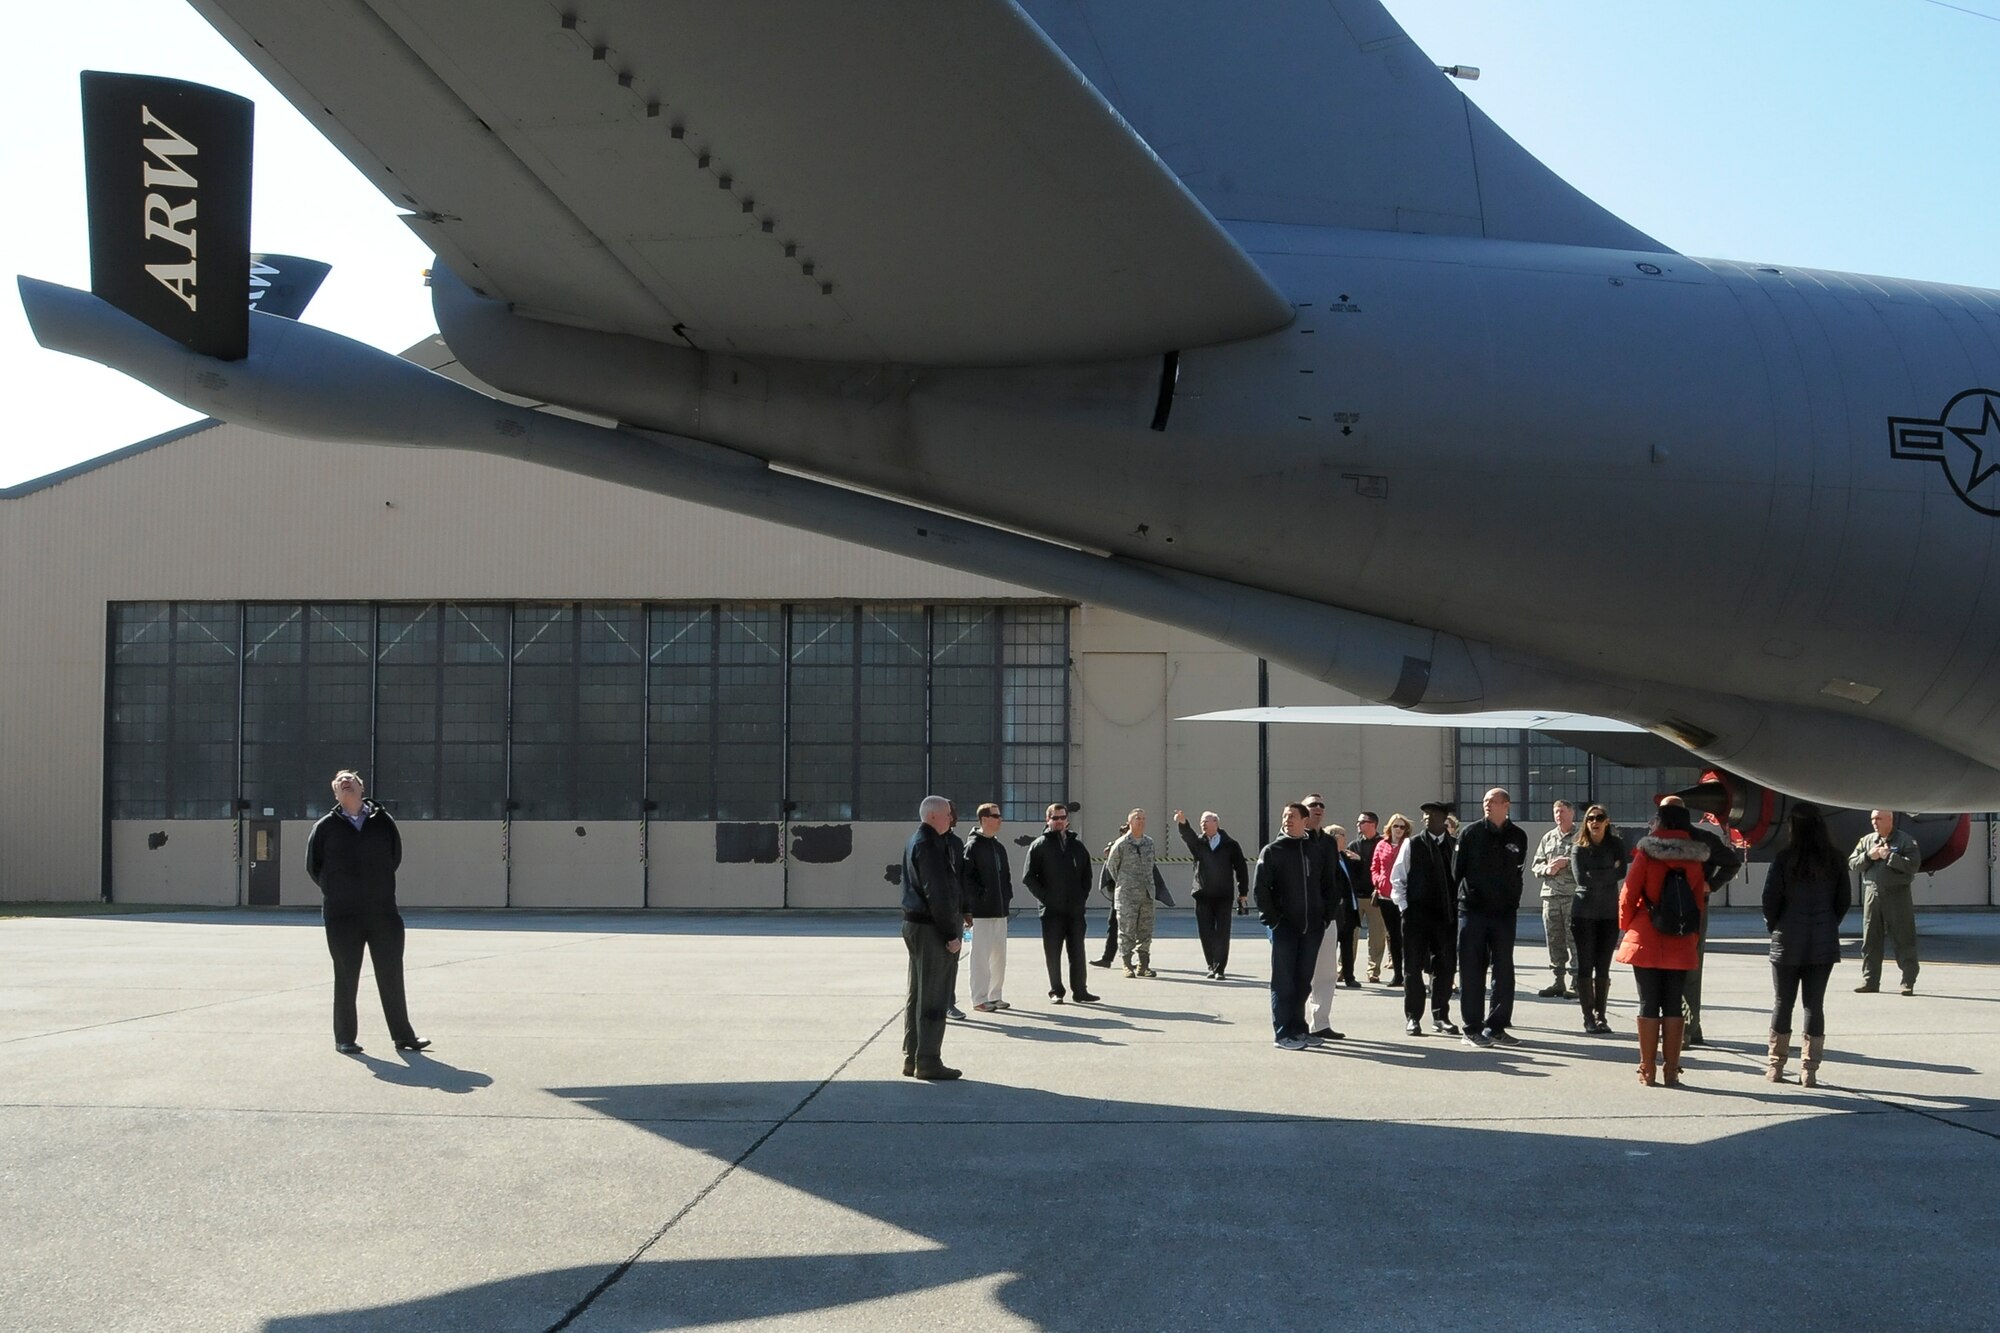 Members of the Batlimore Ravens staff observe the tail section and refueling boom on a 459th Air Refueling Wing KC-135R Stratotanker during a tour on the Joint Base Andrews, Maryland, flight line March 7, 2016. The 459th also showcased missions to the group such as inflight refueling, maintenance, aerial port and aeromedical evacuation. (U.S. Air Force photo/Staff Sgt. Kat Justen)